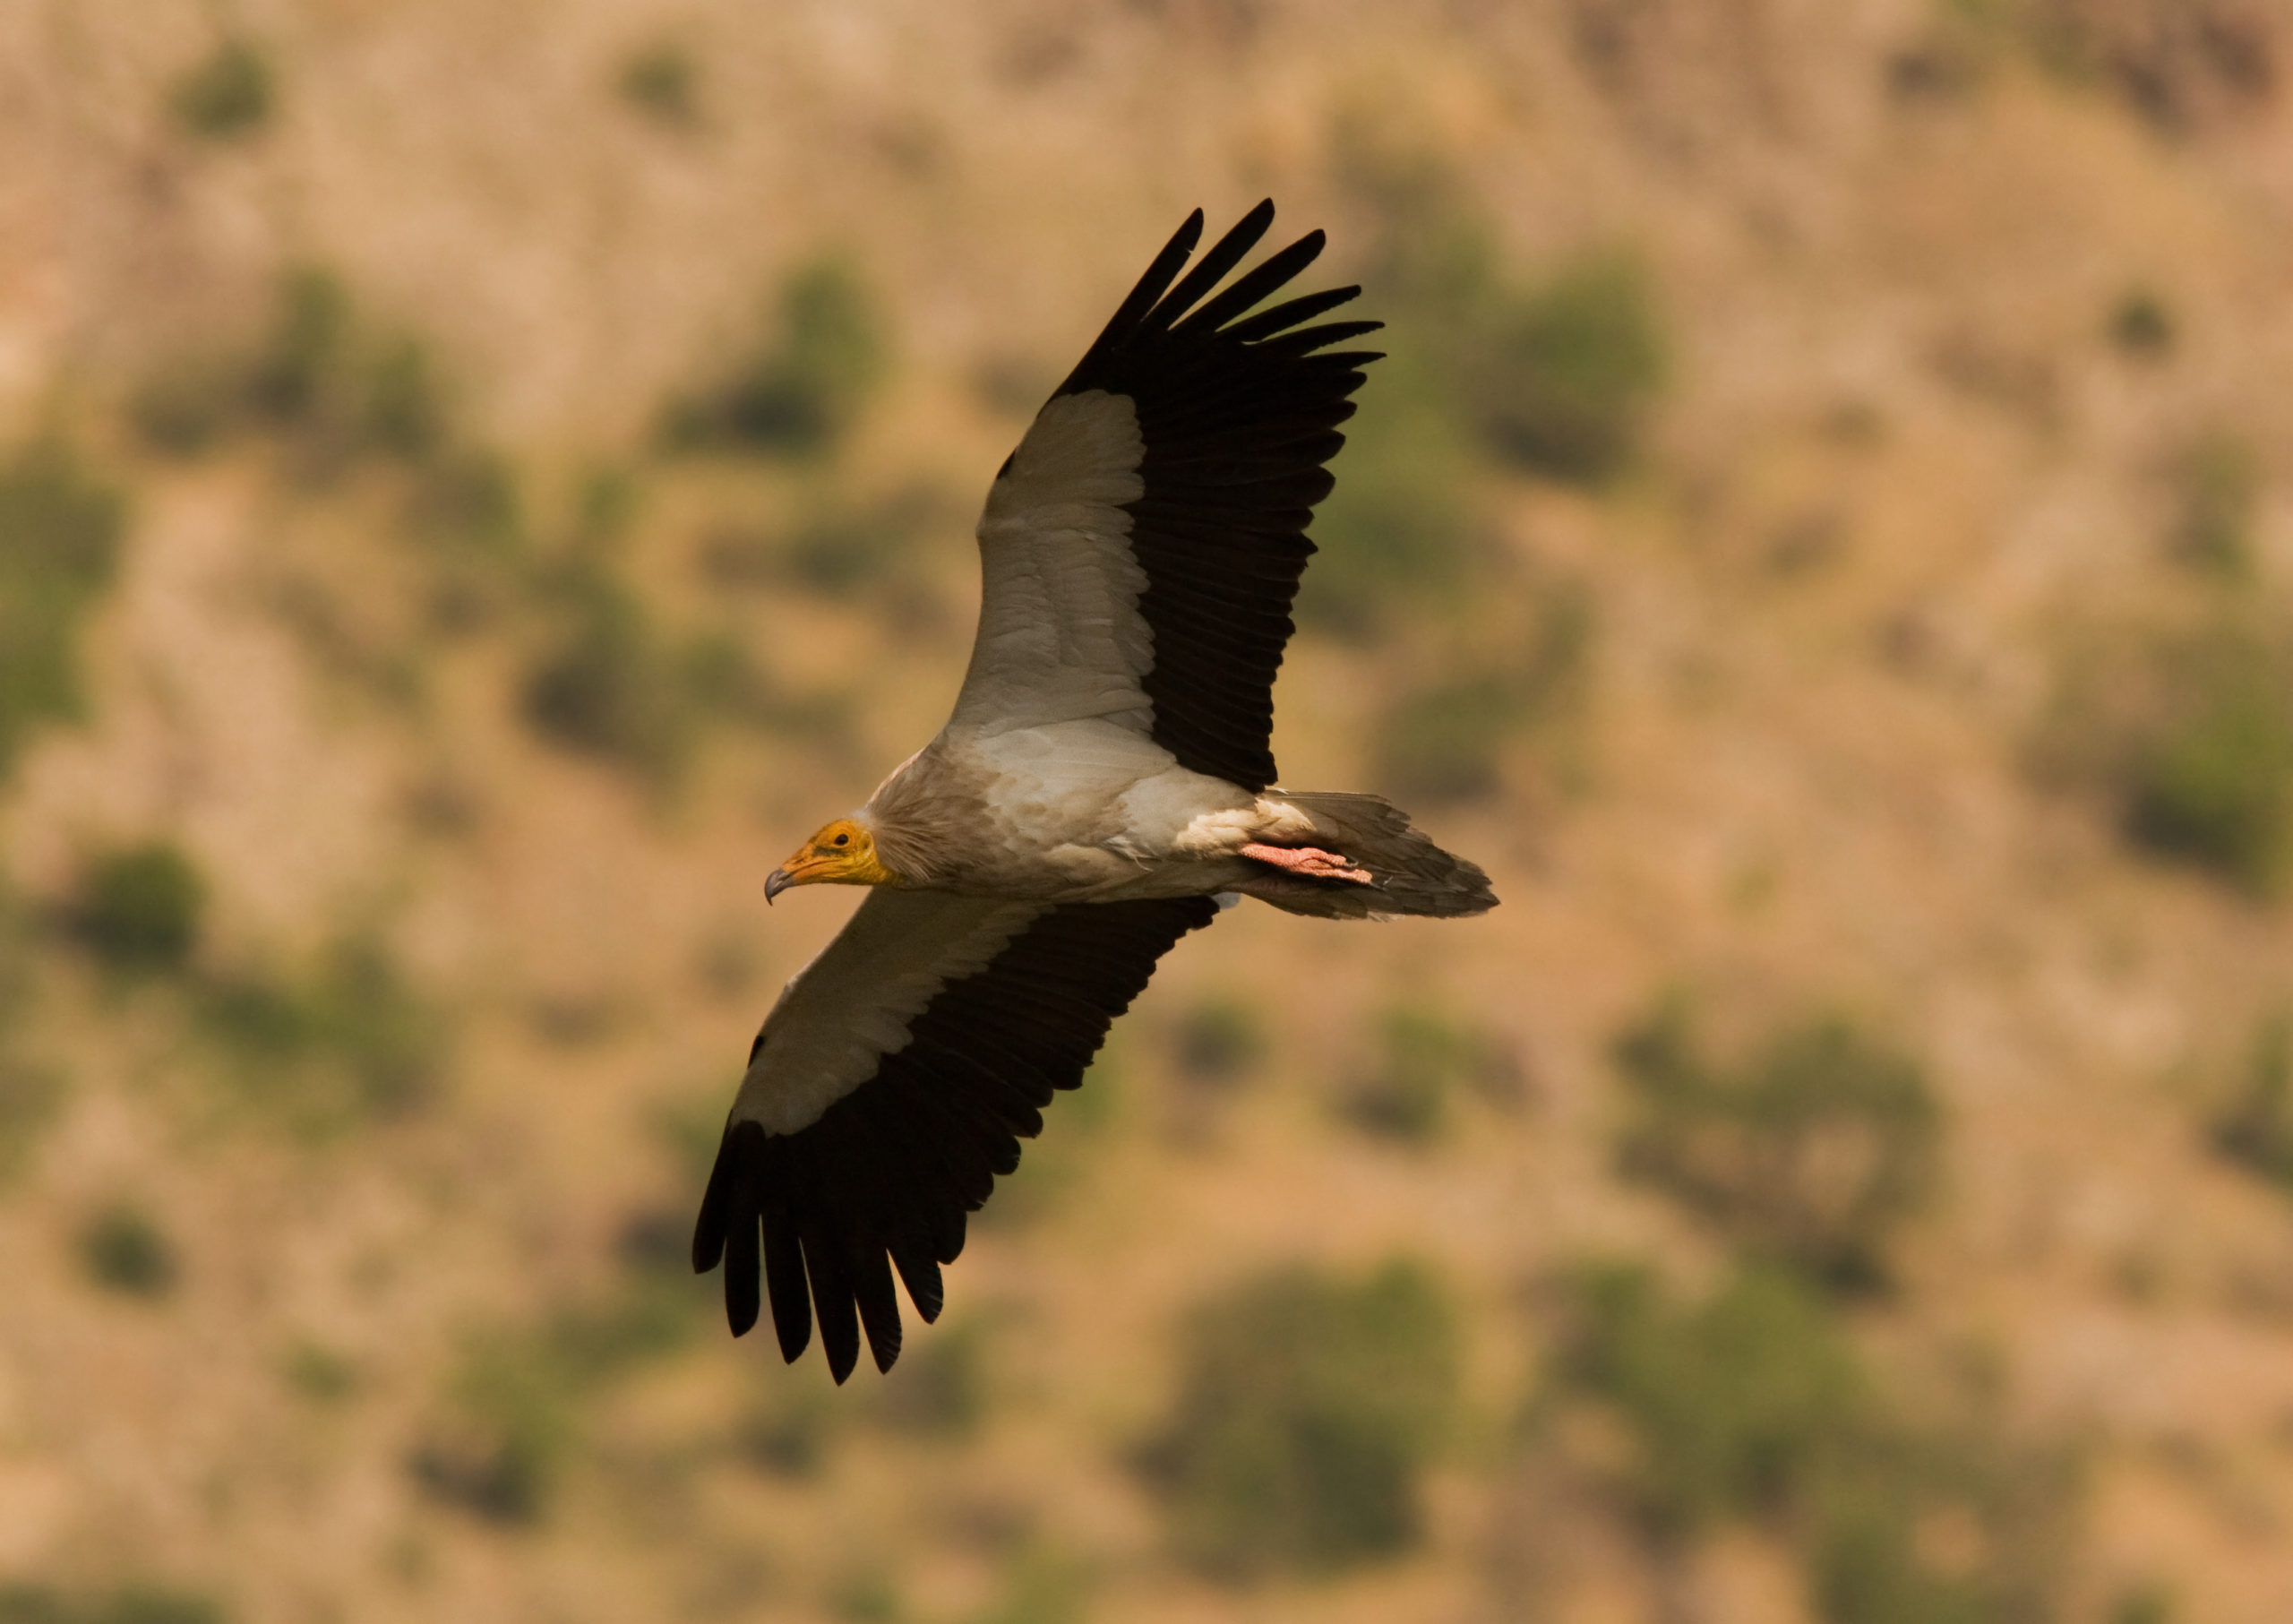 The bond between the Egyptian vulture and the last free river in Europe